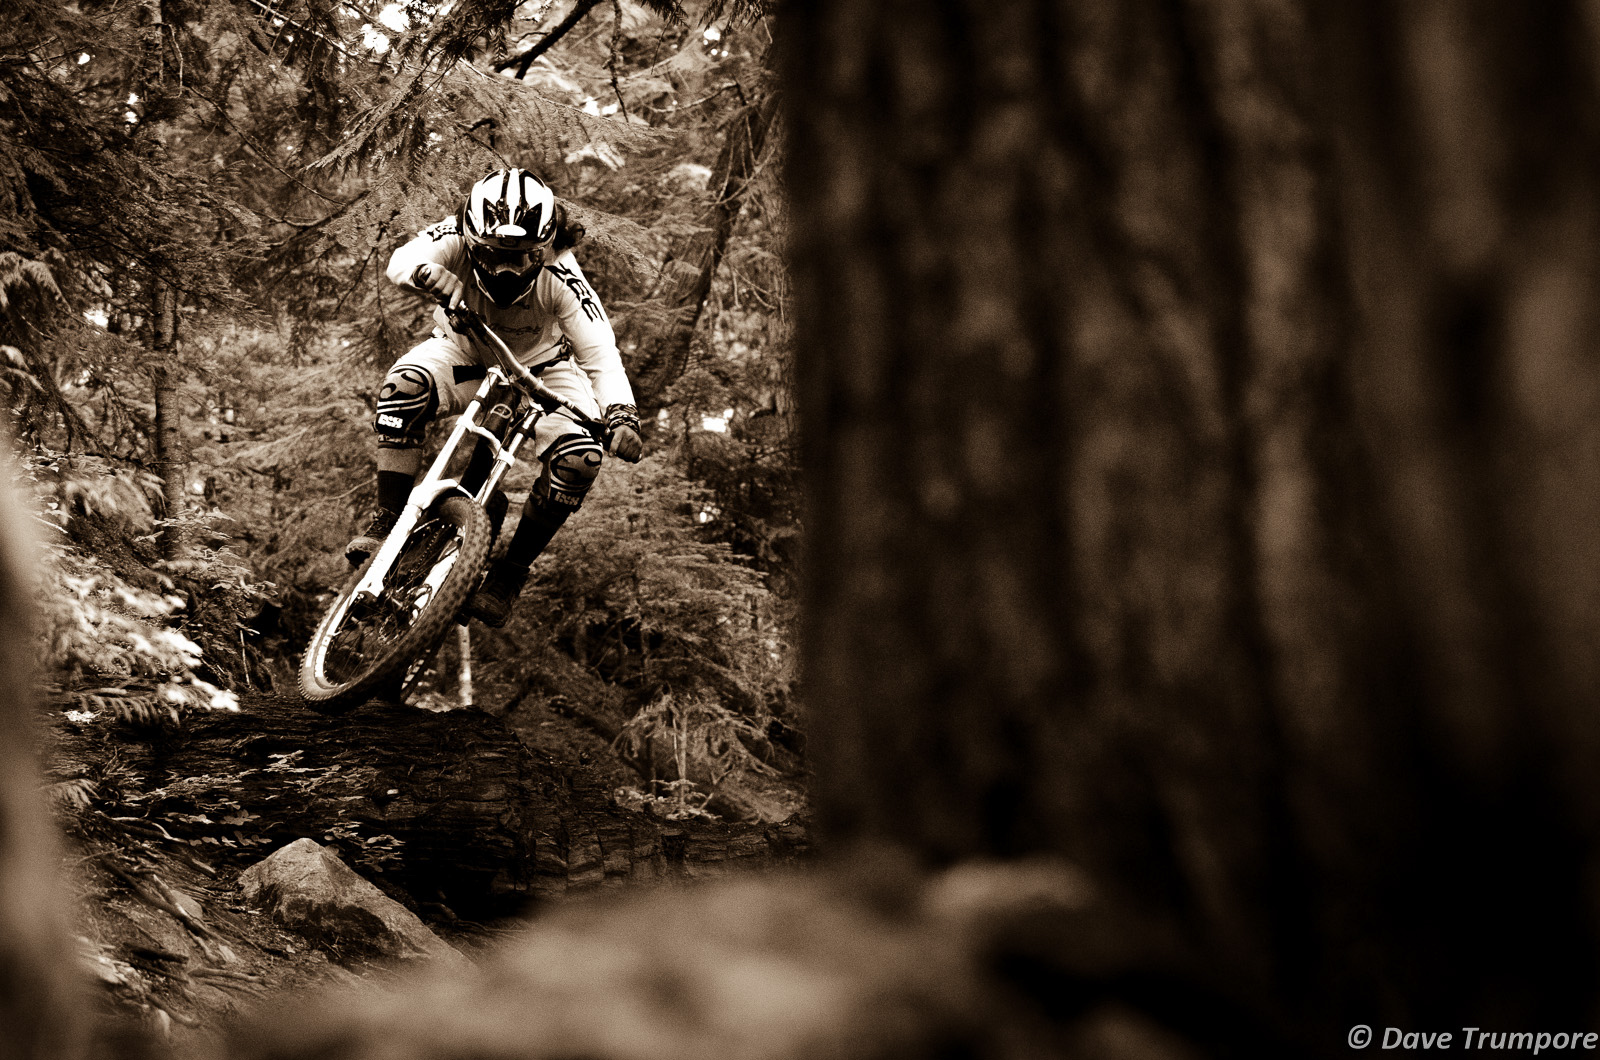 Mikey Haderer through the forest in Whistler